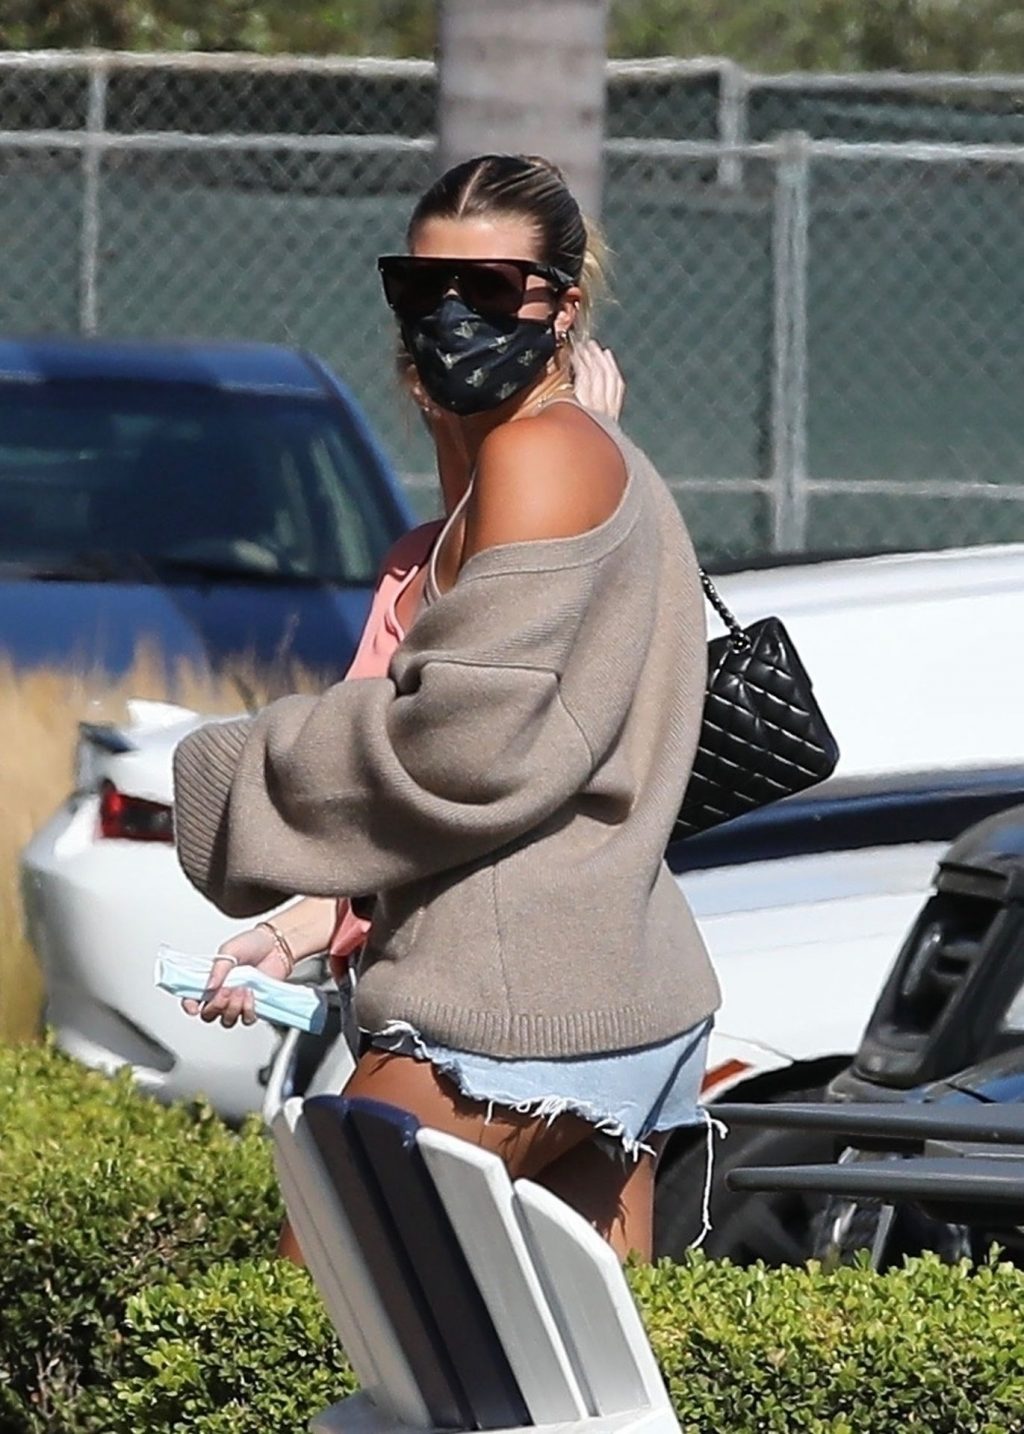 Leggy Sofia Richie Shops with Friends at the Malibu Country Mart (Photos)